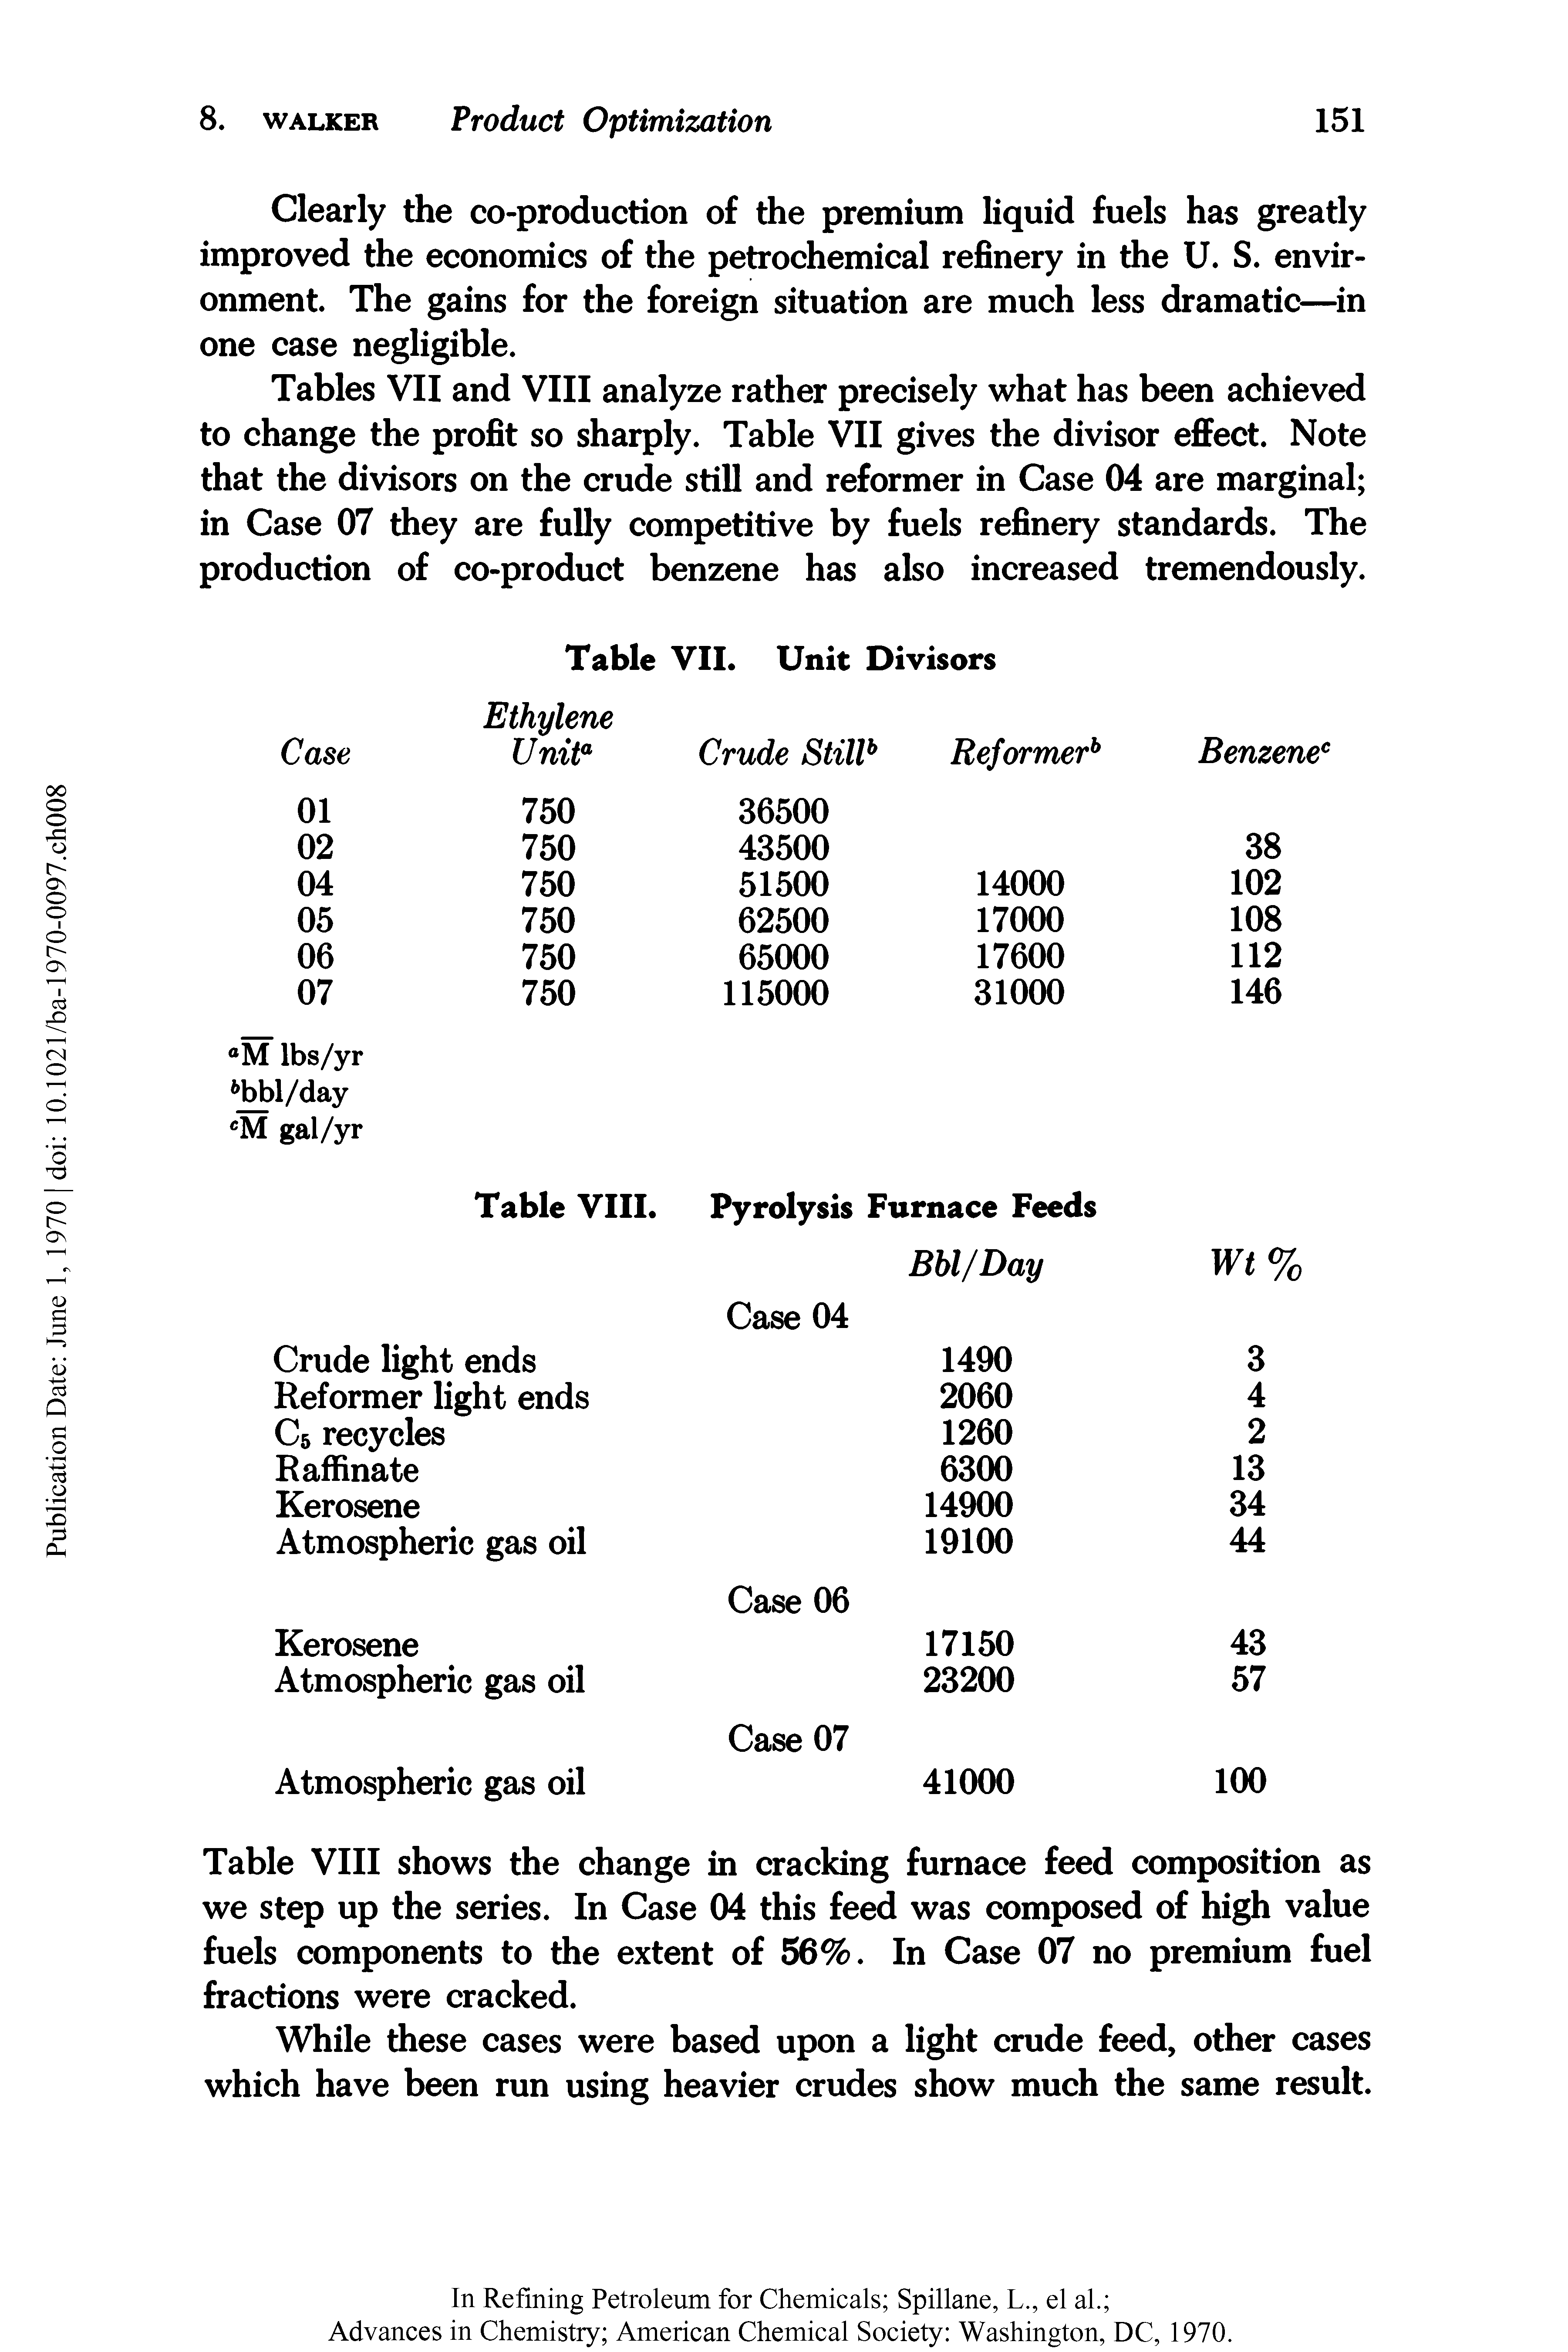 Tables VII and VIII analyze rather precisely what has been achieved to change the profit so sharply. Table VII gives the divisor effect. Note that the divisors on the crude still and reformer in Case 04 are marginal in Case 07 they are fully competitive by fuels refinery standards. The production of co-product benzene has also increased tremendously.